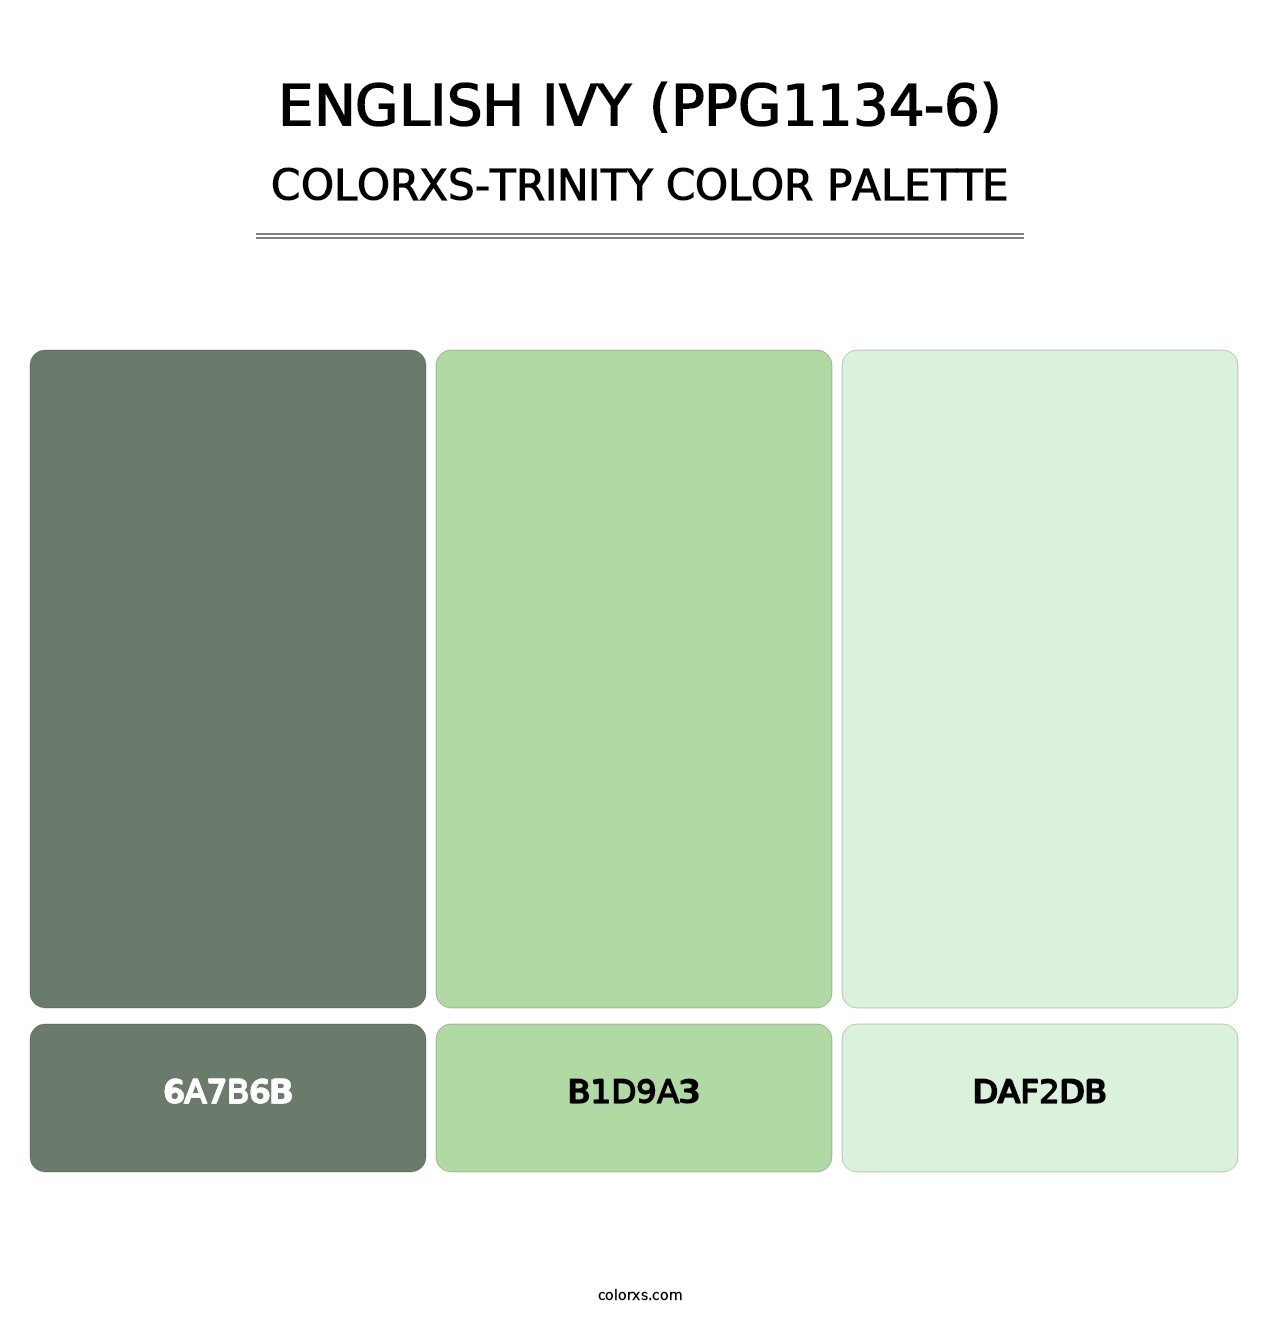 English Ivy (PPG1134-6) - Colorxs Trinity Palette